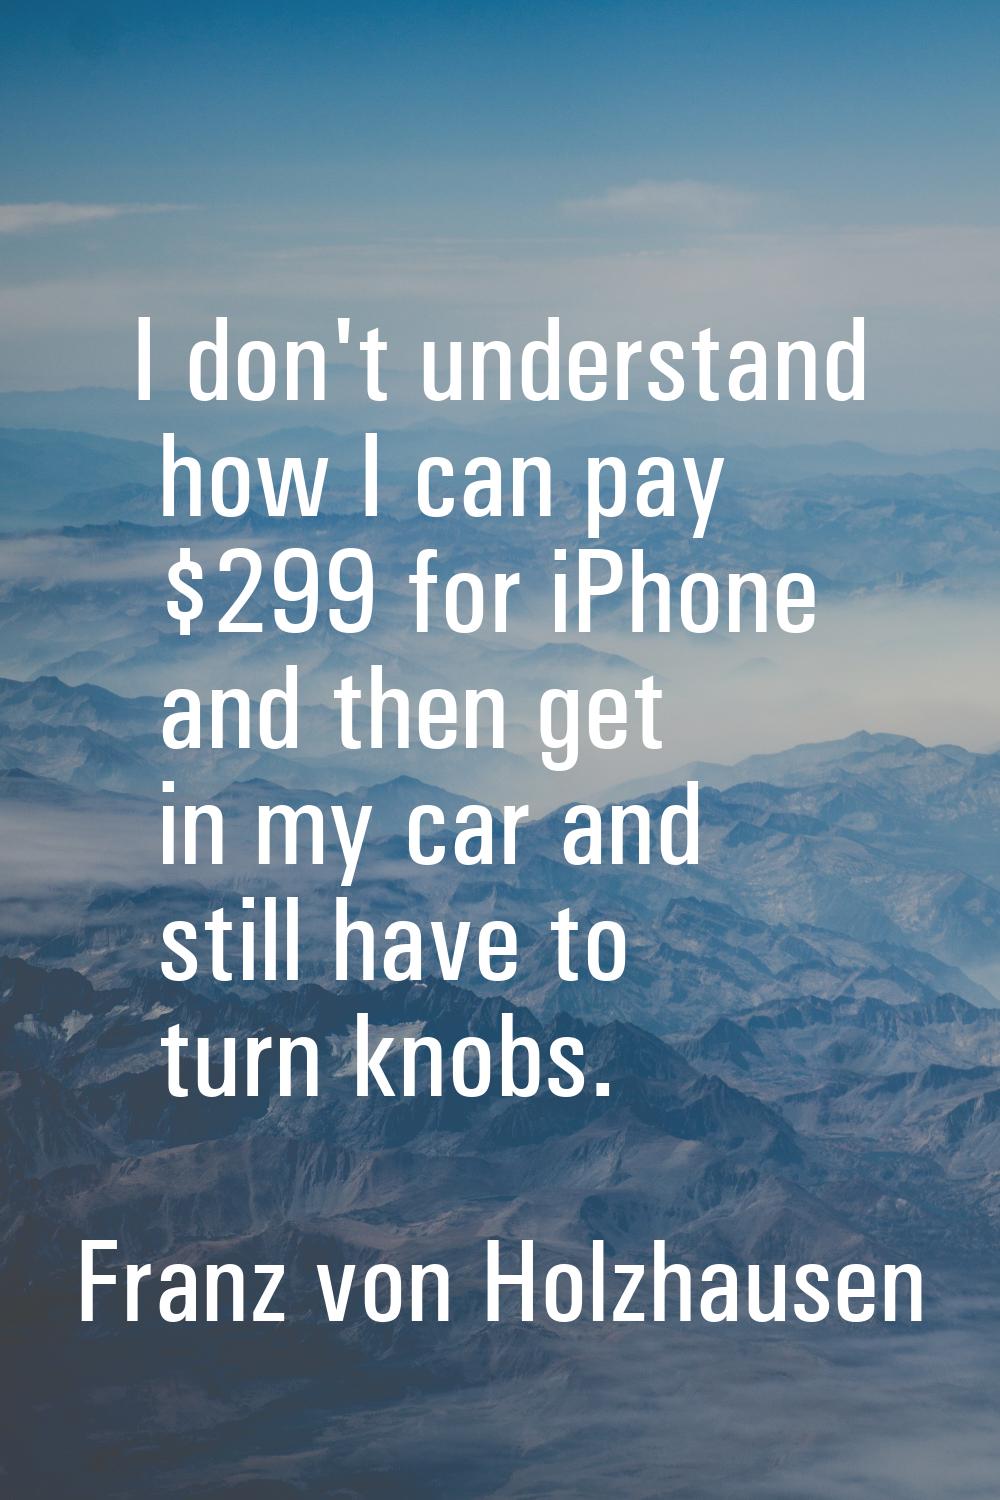 I don't understand how I can pay $299 for iPhone and then get in my car and still have to turn knob